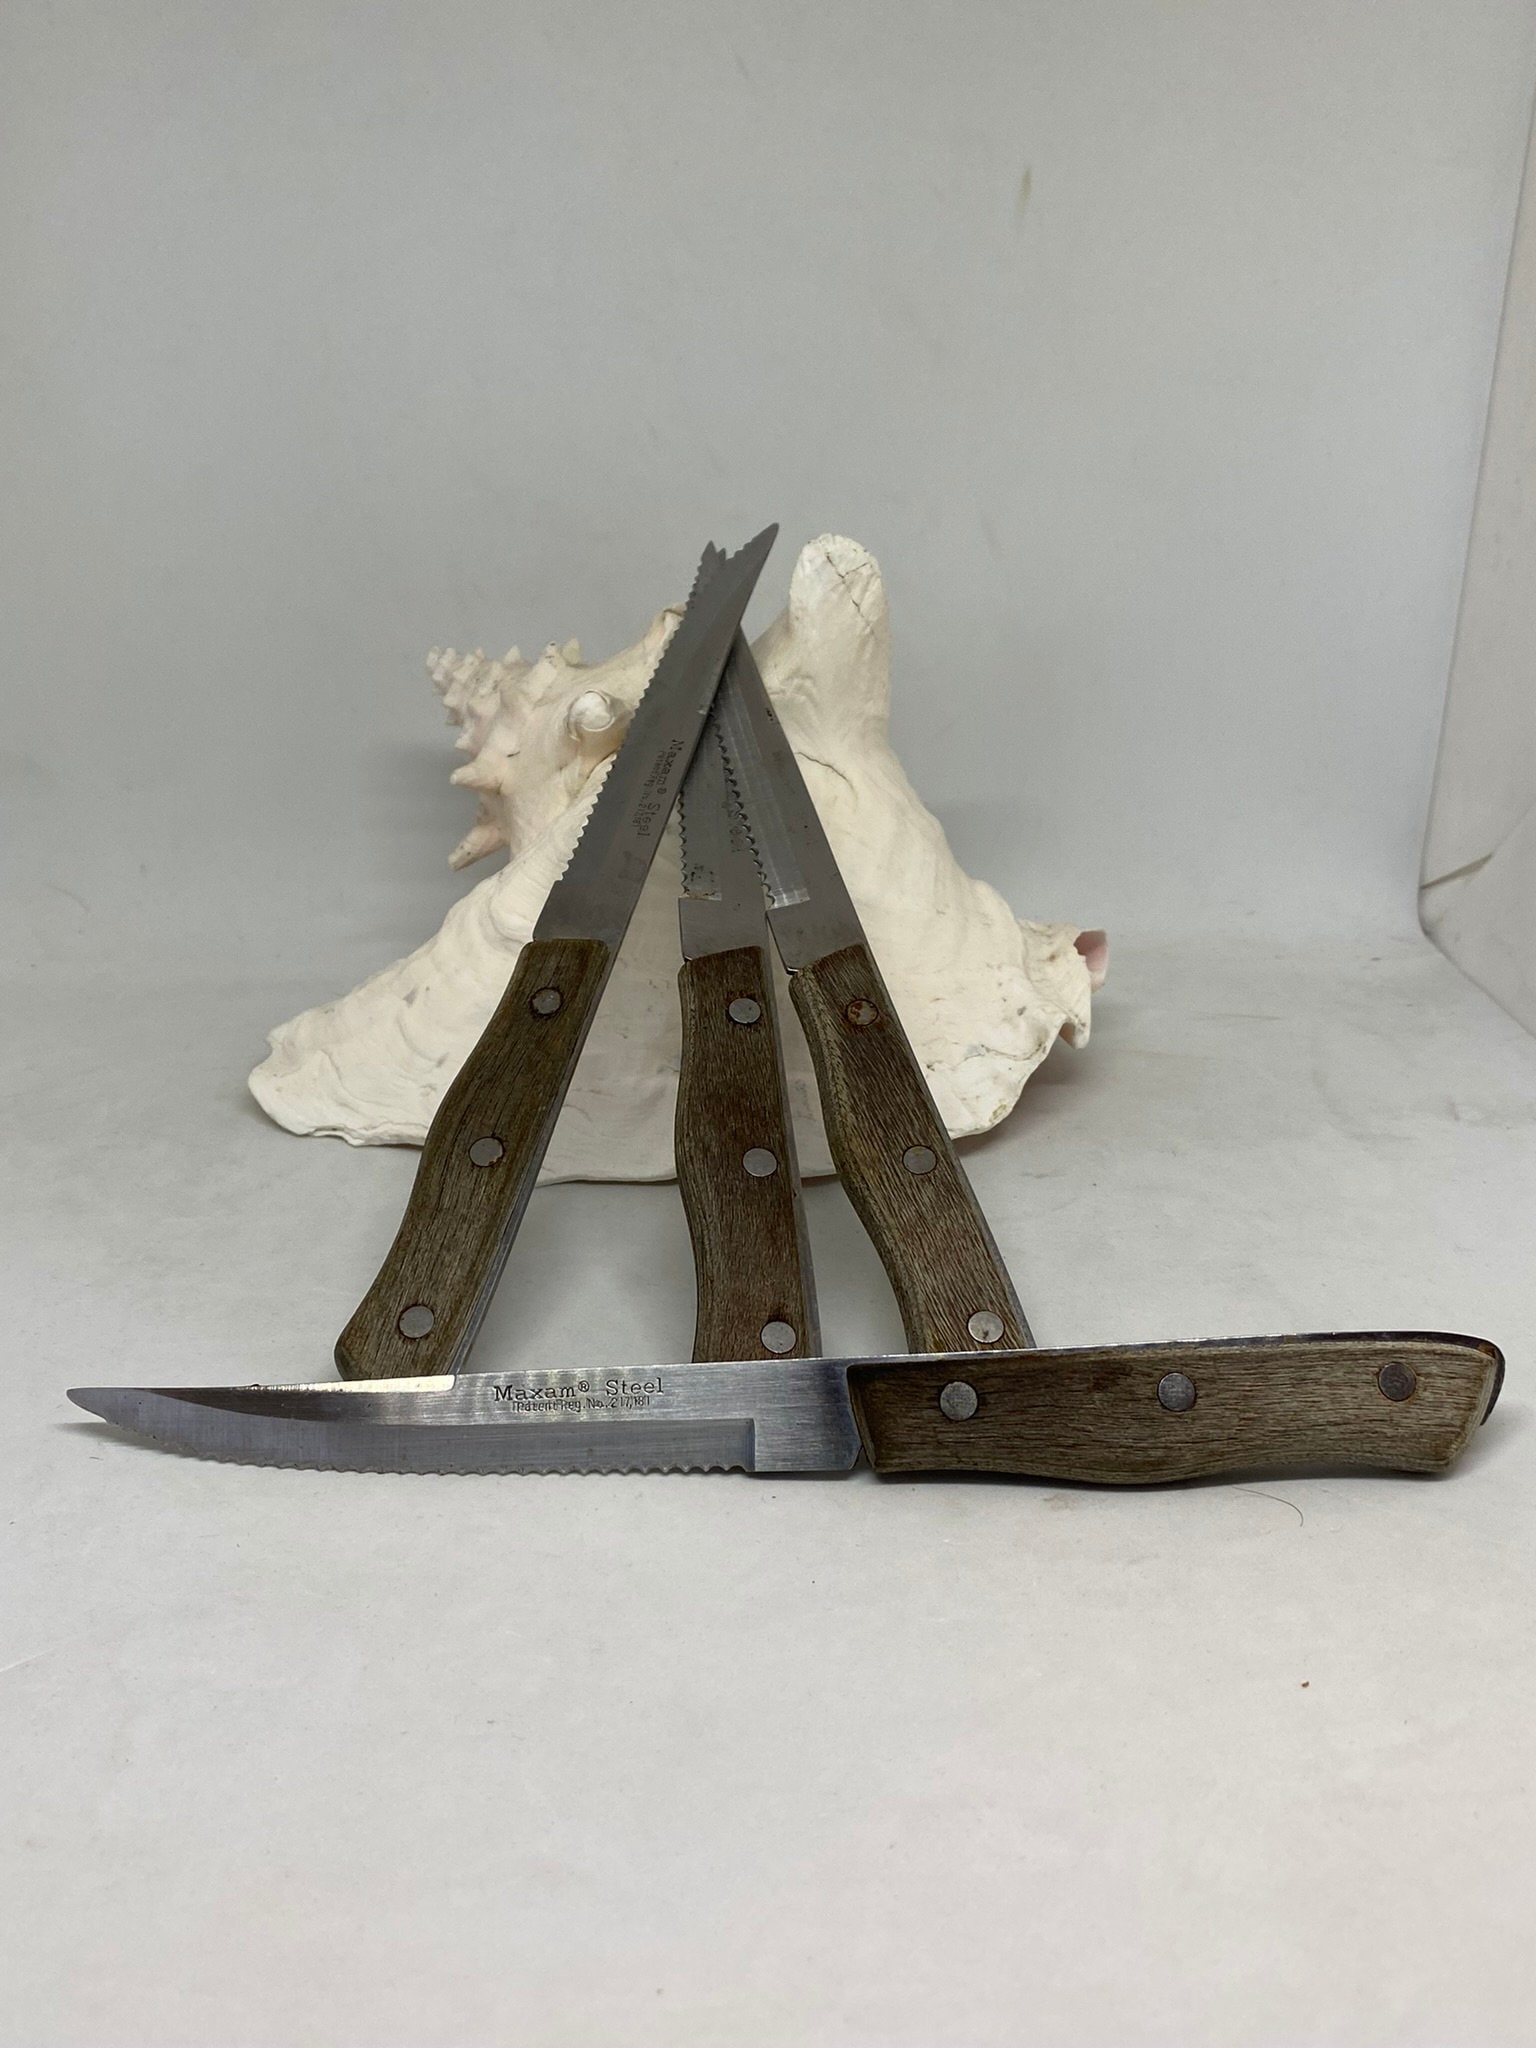 Sold at Auction: Cutco Cutlery Cheese & Paring Knife w Original Box